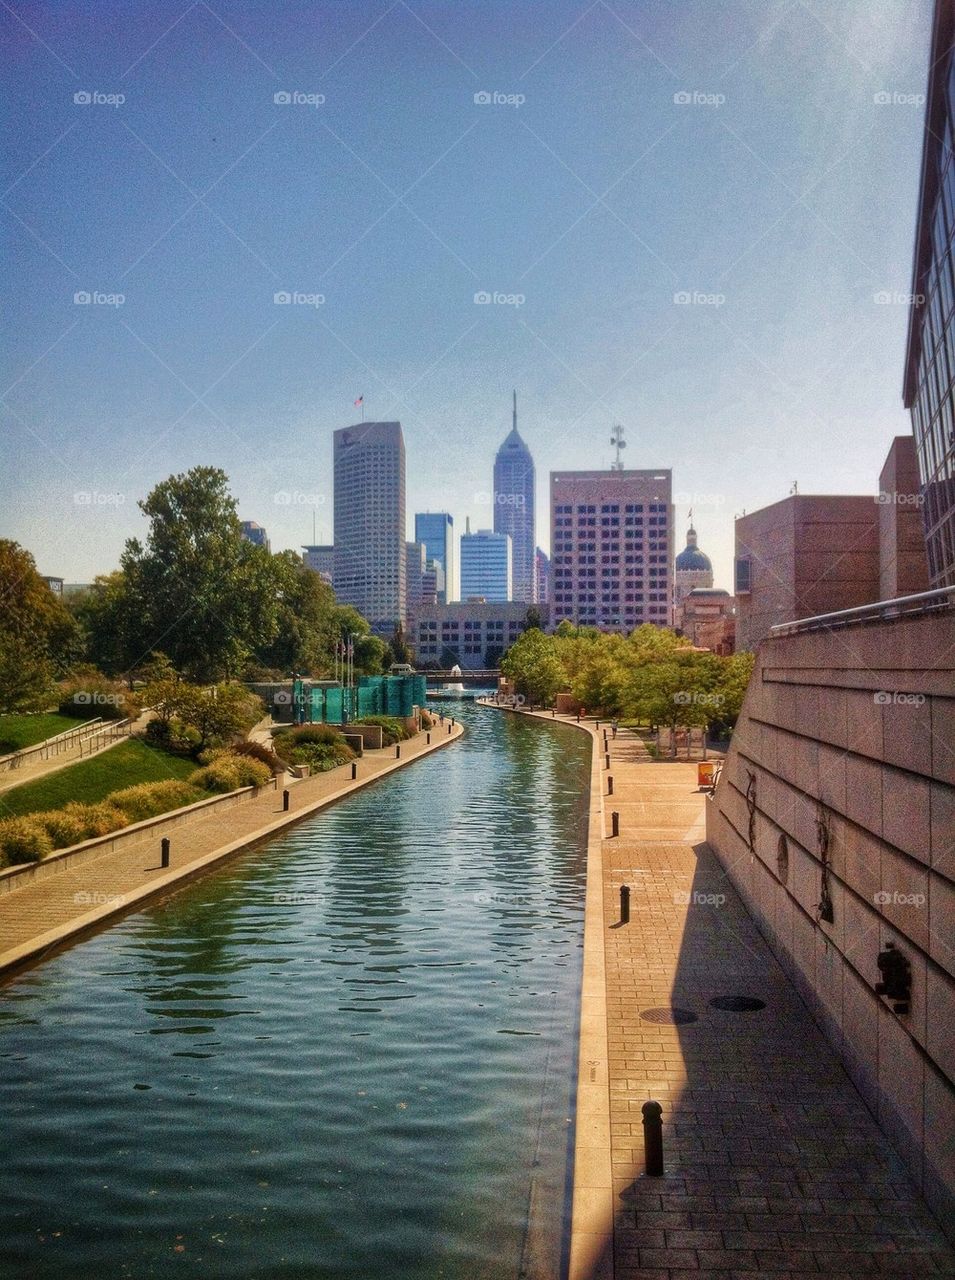 Downtown Indianapolis from above the canal at the state museum.